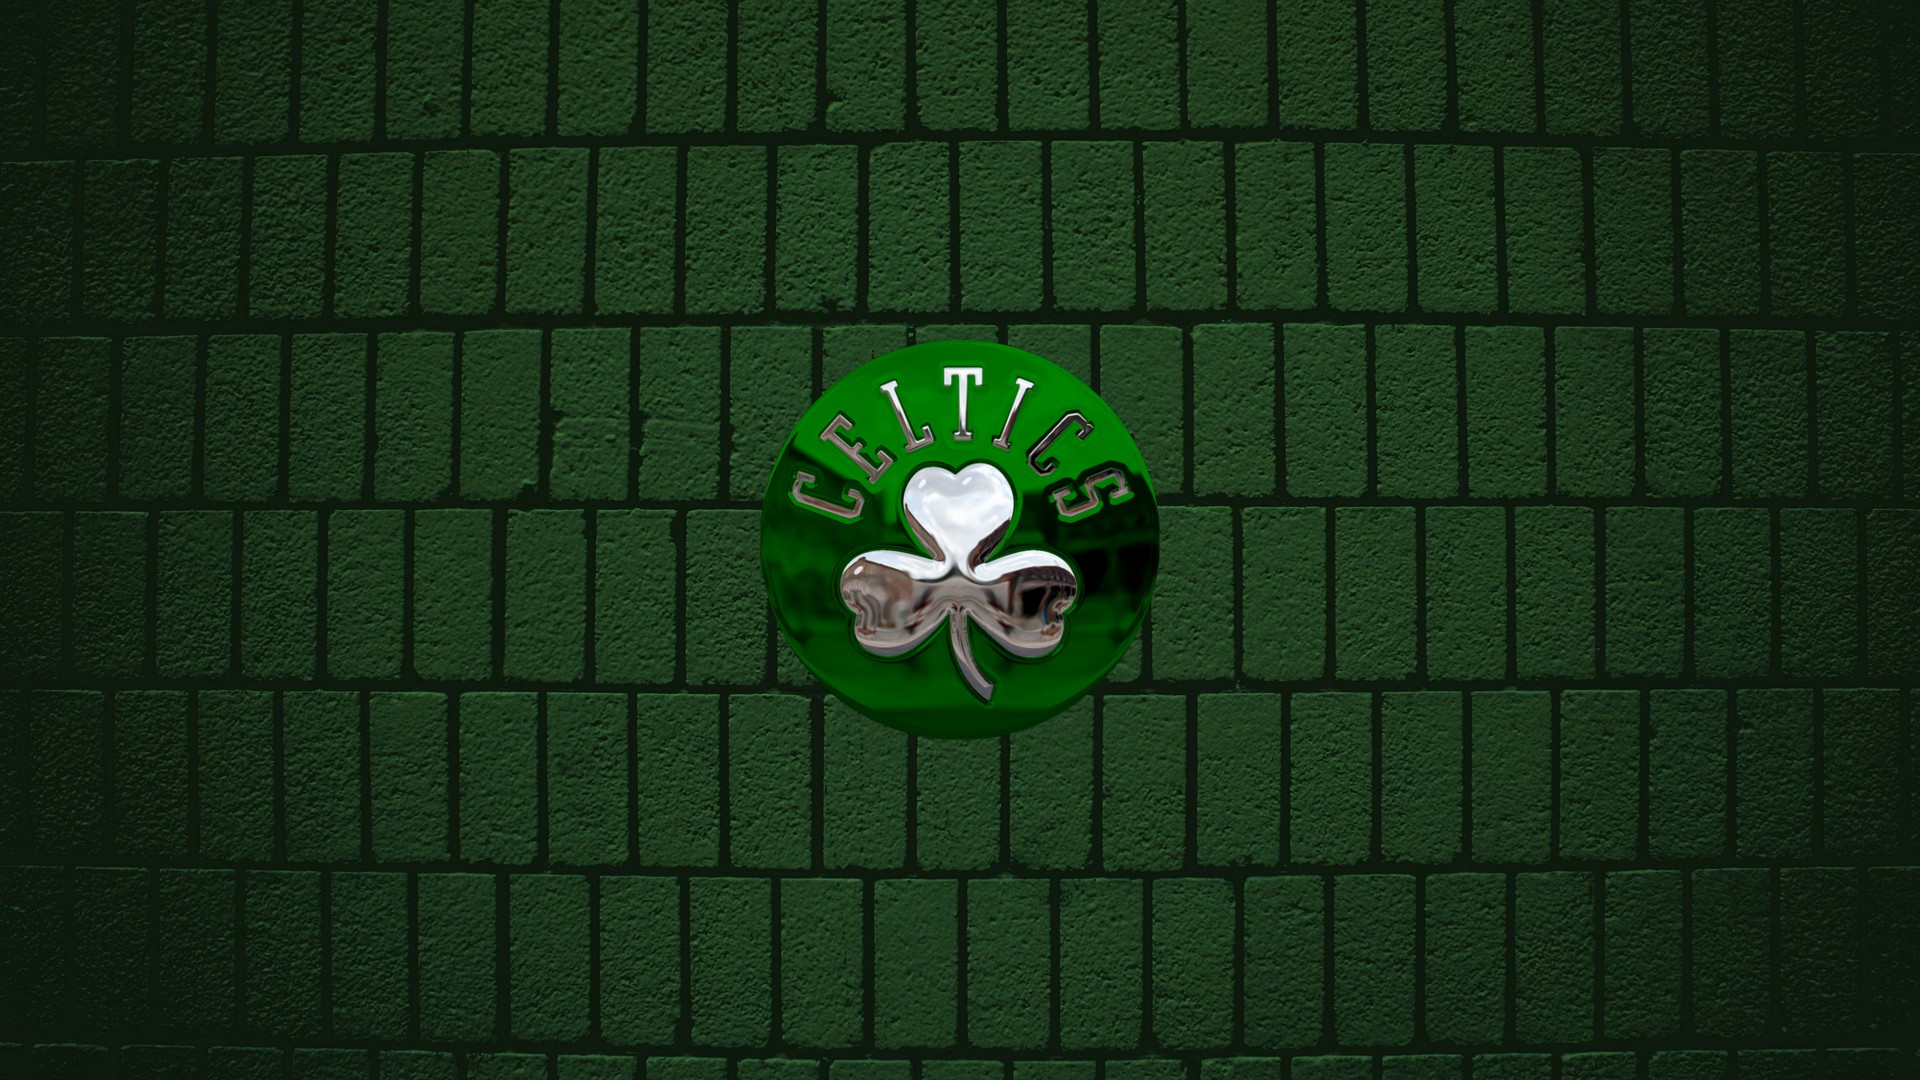 Wallpaper Desktop Boston Celtics Logo HD with image dimensions 1920x1080 pixel. You can make this wallpaper for your Desktop Computer Backgrounds, Windows or Mac Screensavers, iPhone Lock screen, Tablet or Android and another Mobile Phone device